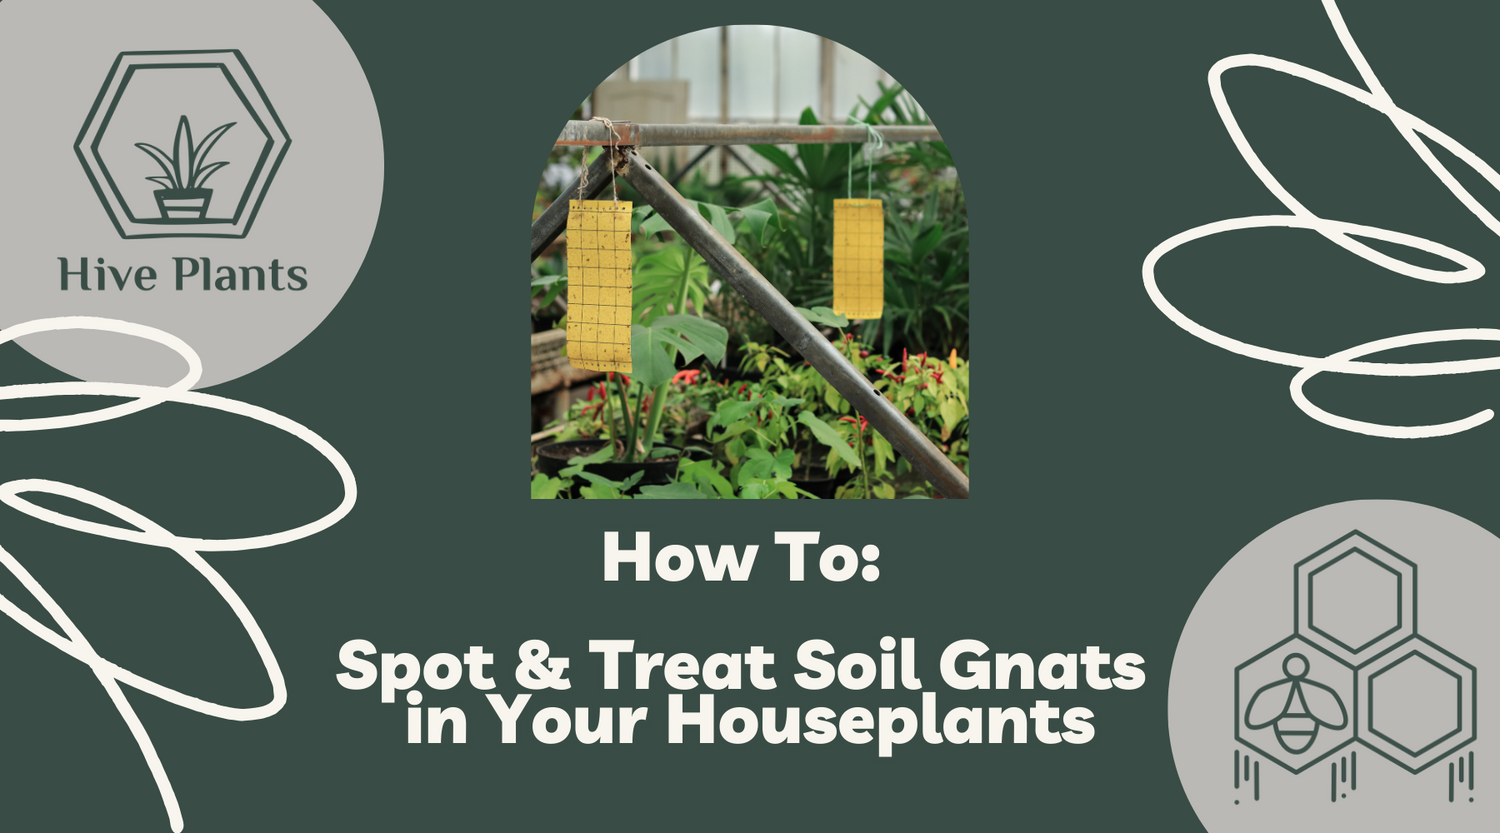 How To Spot and Treat Soil Gnats in Your Houseplants